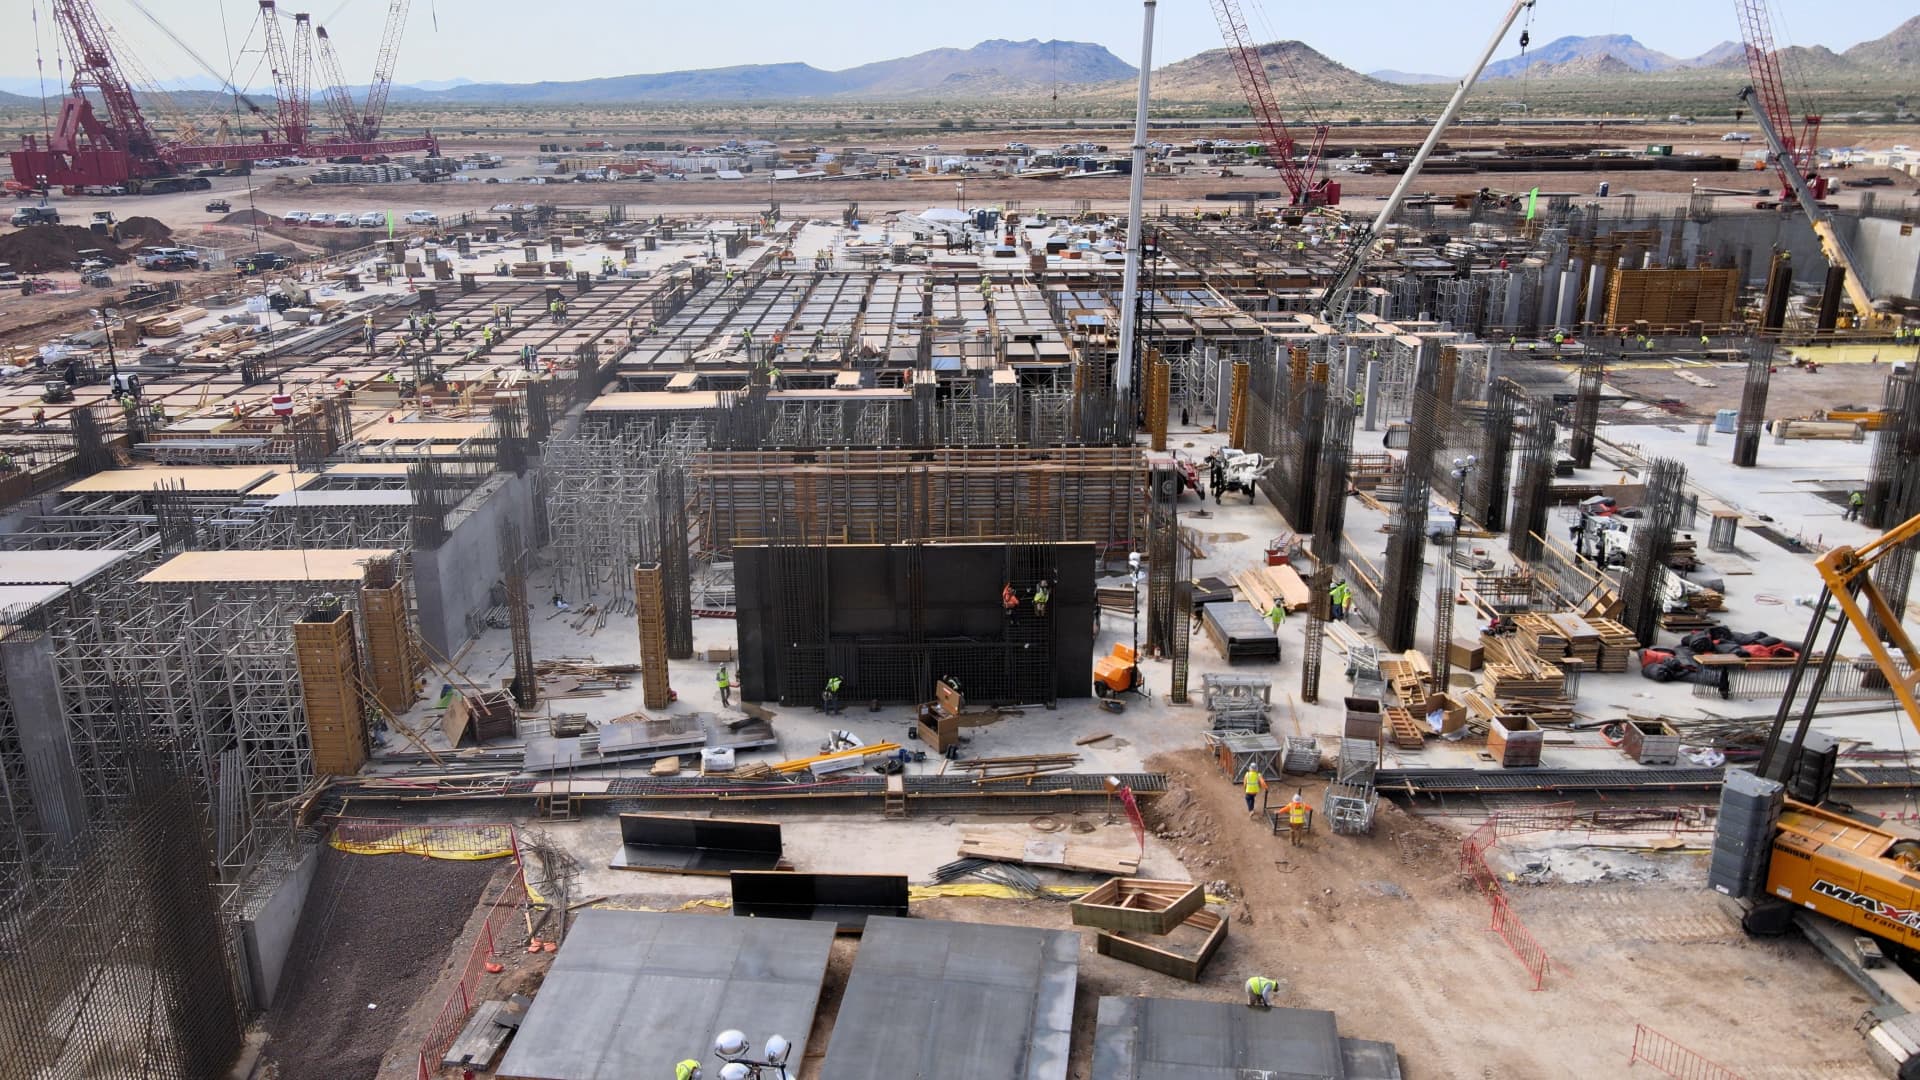 TSMC's $12 billion 5-nanometer chip fabrication plant is six months into being built in northern Phoenix, Arizona, on September 28, 2021.